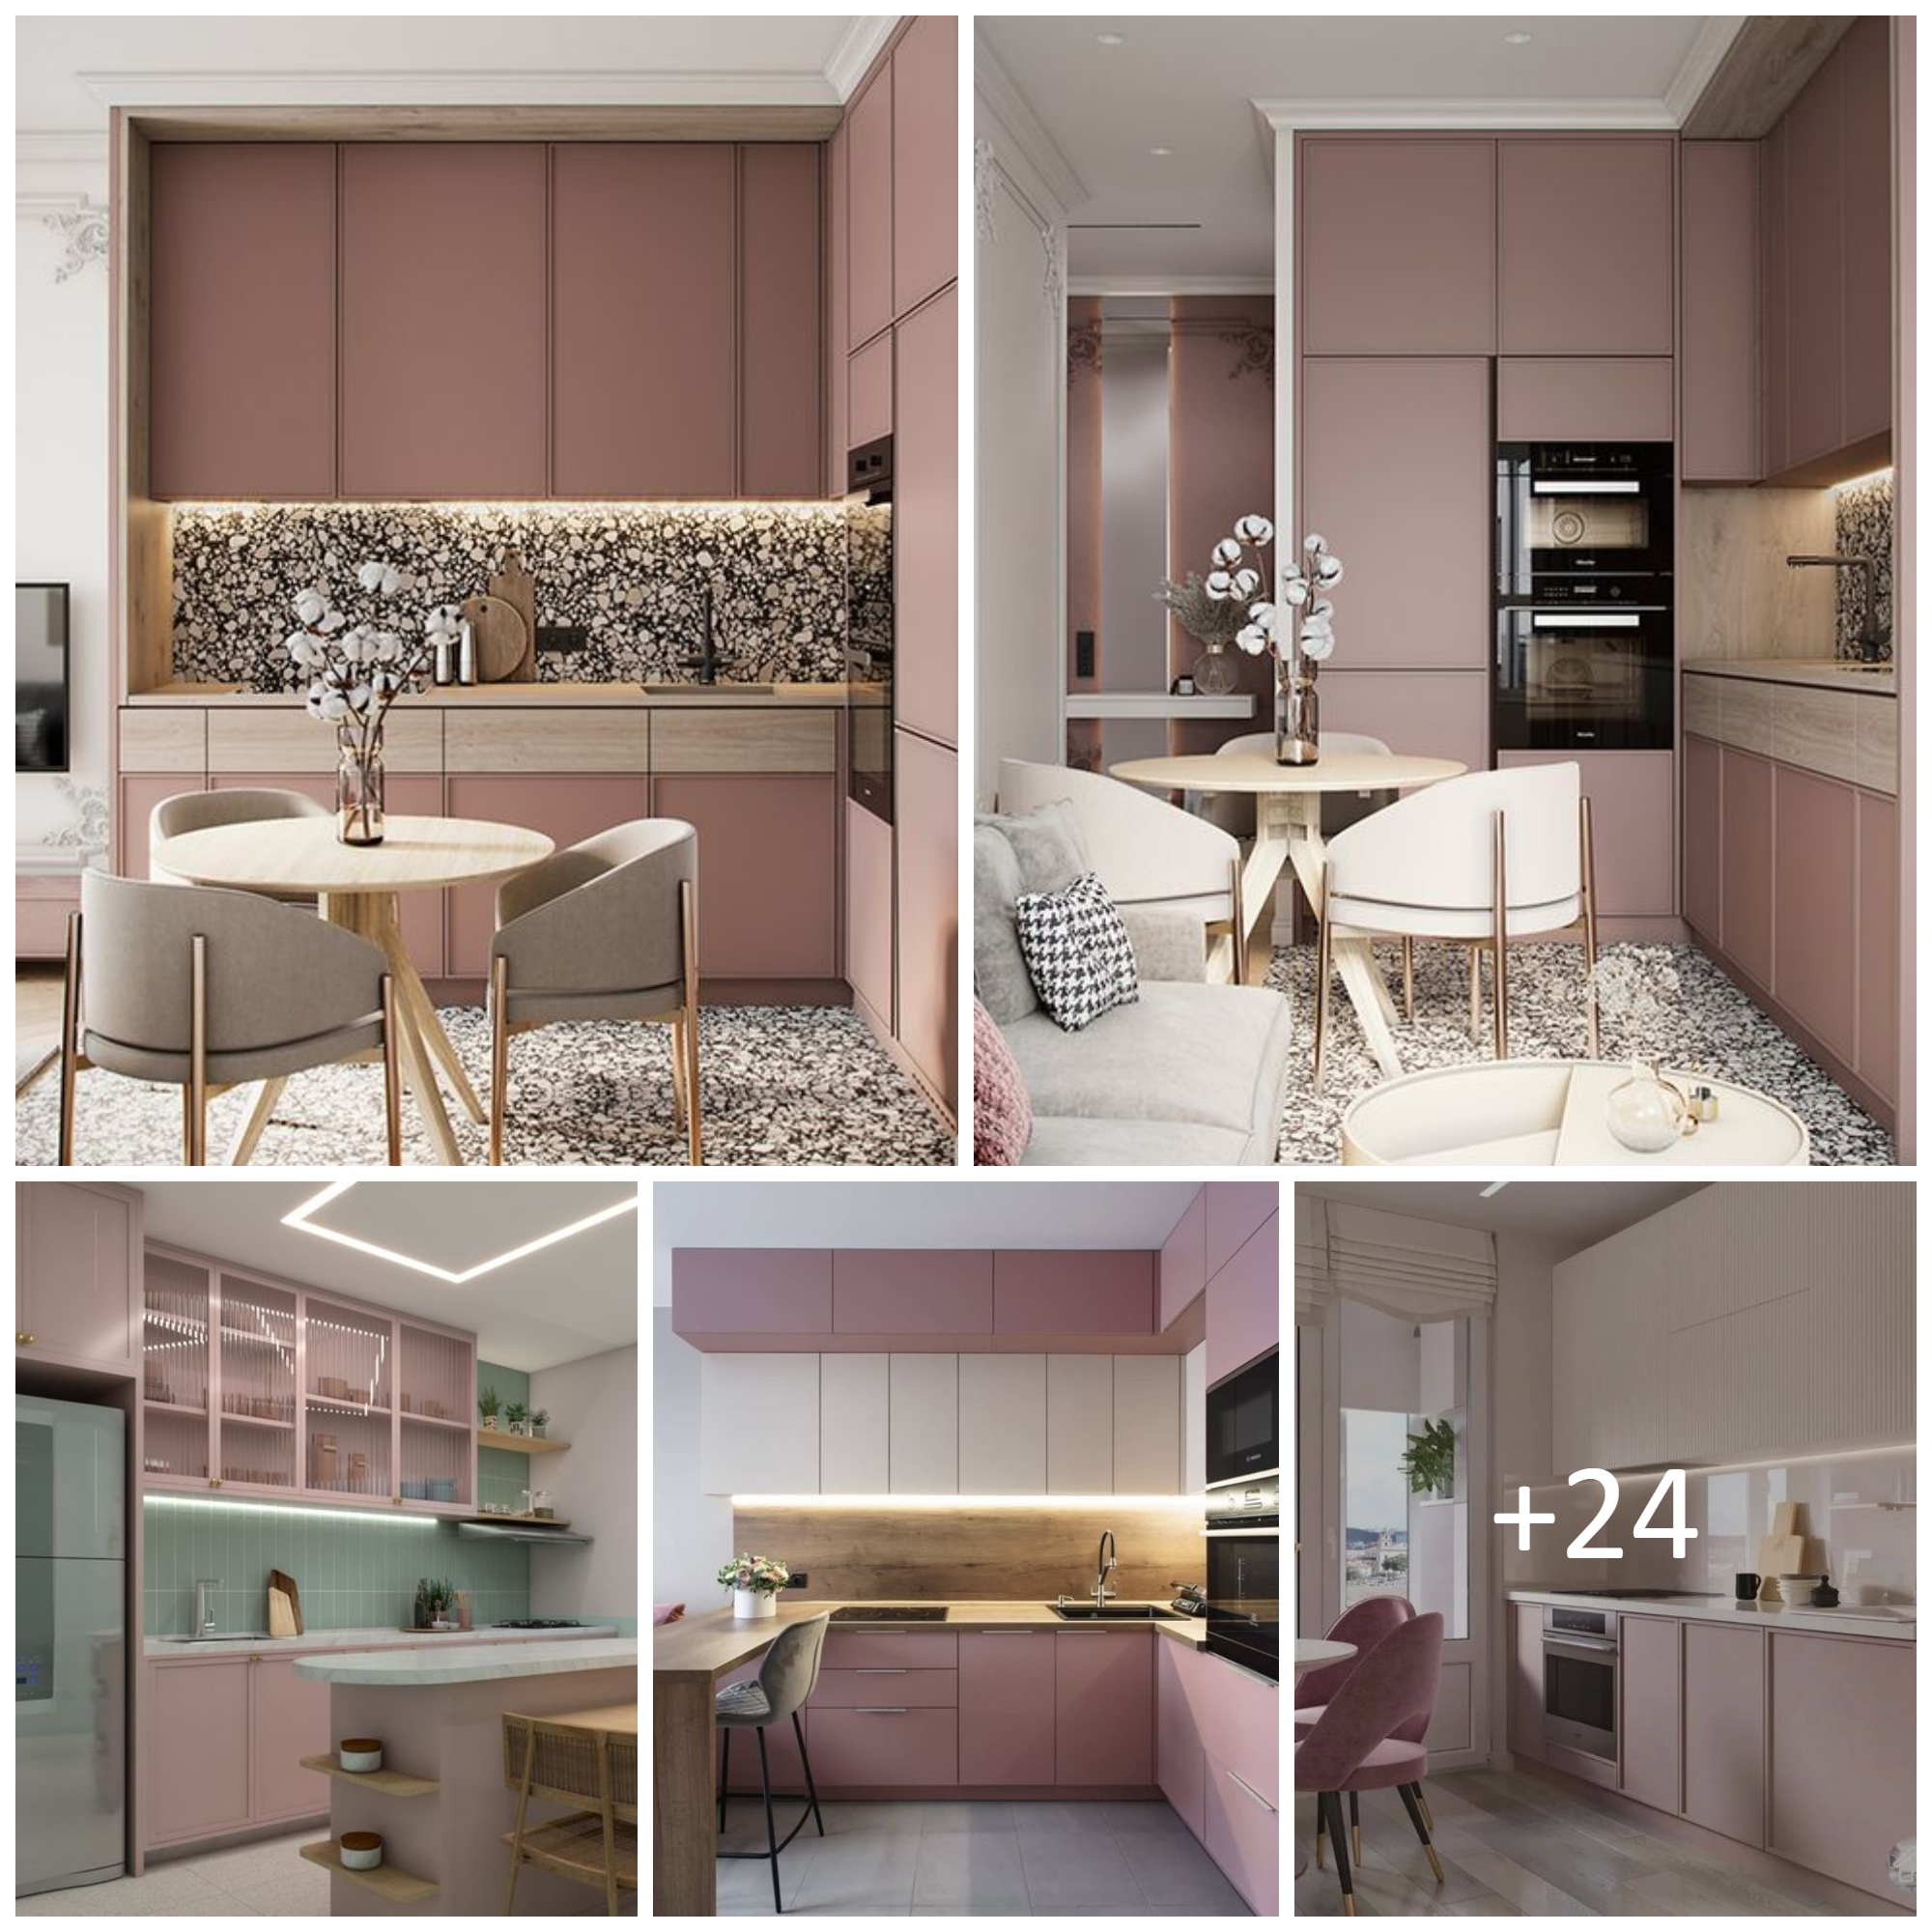 Pink Kitchen Ideas That’ll Add Personality to Your Home